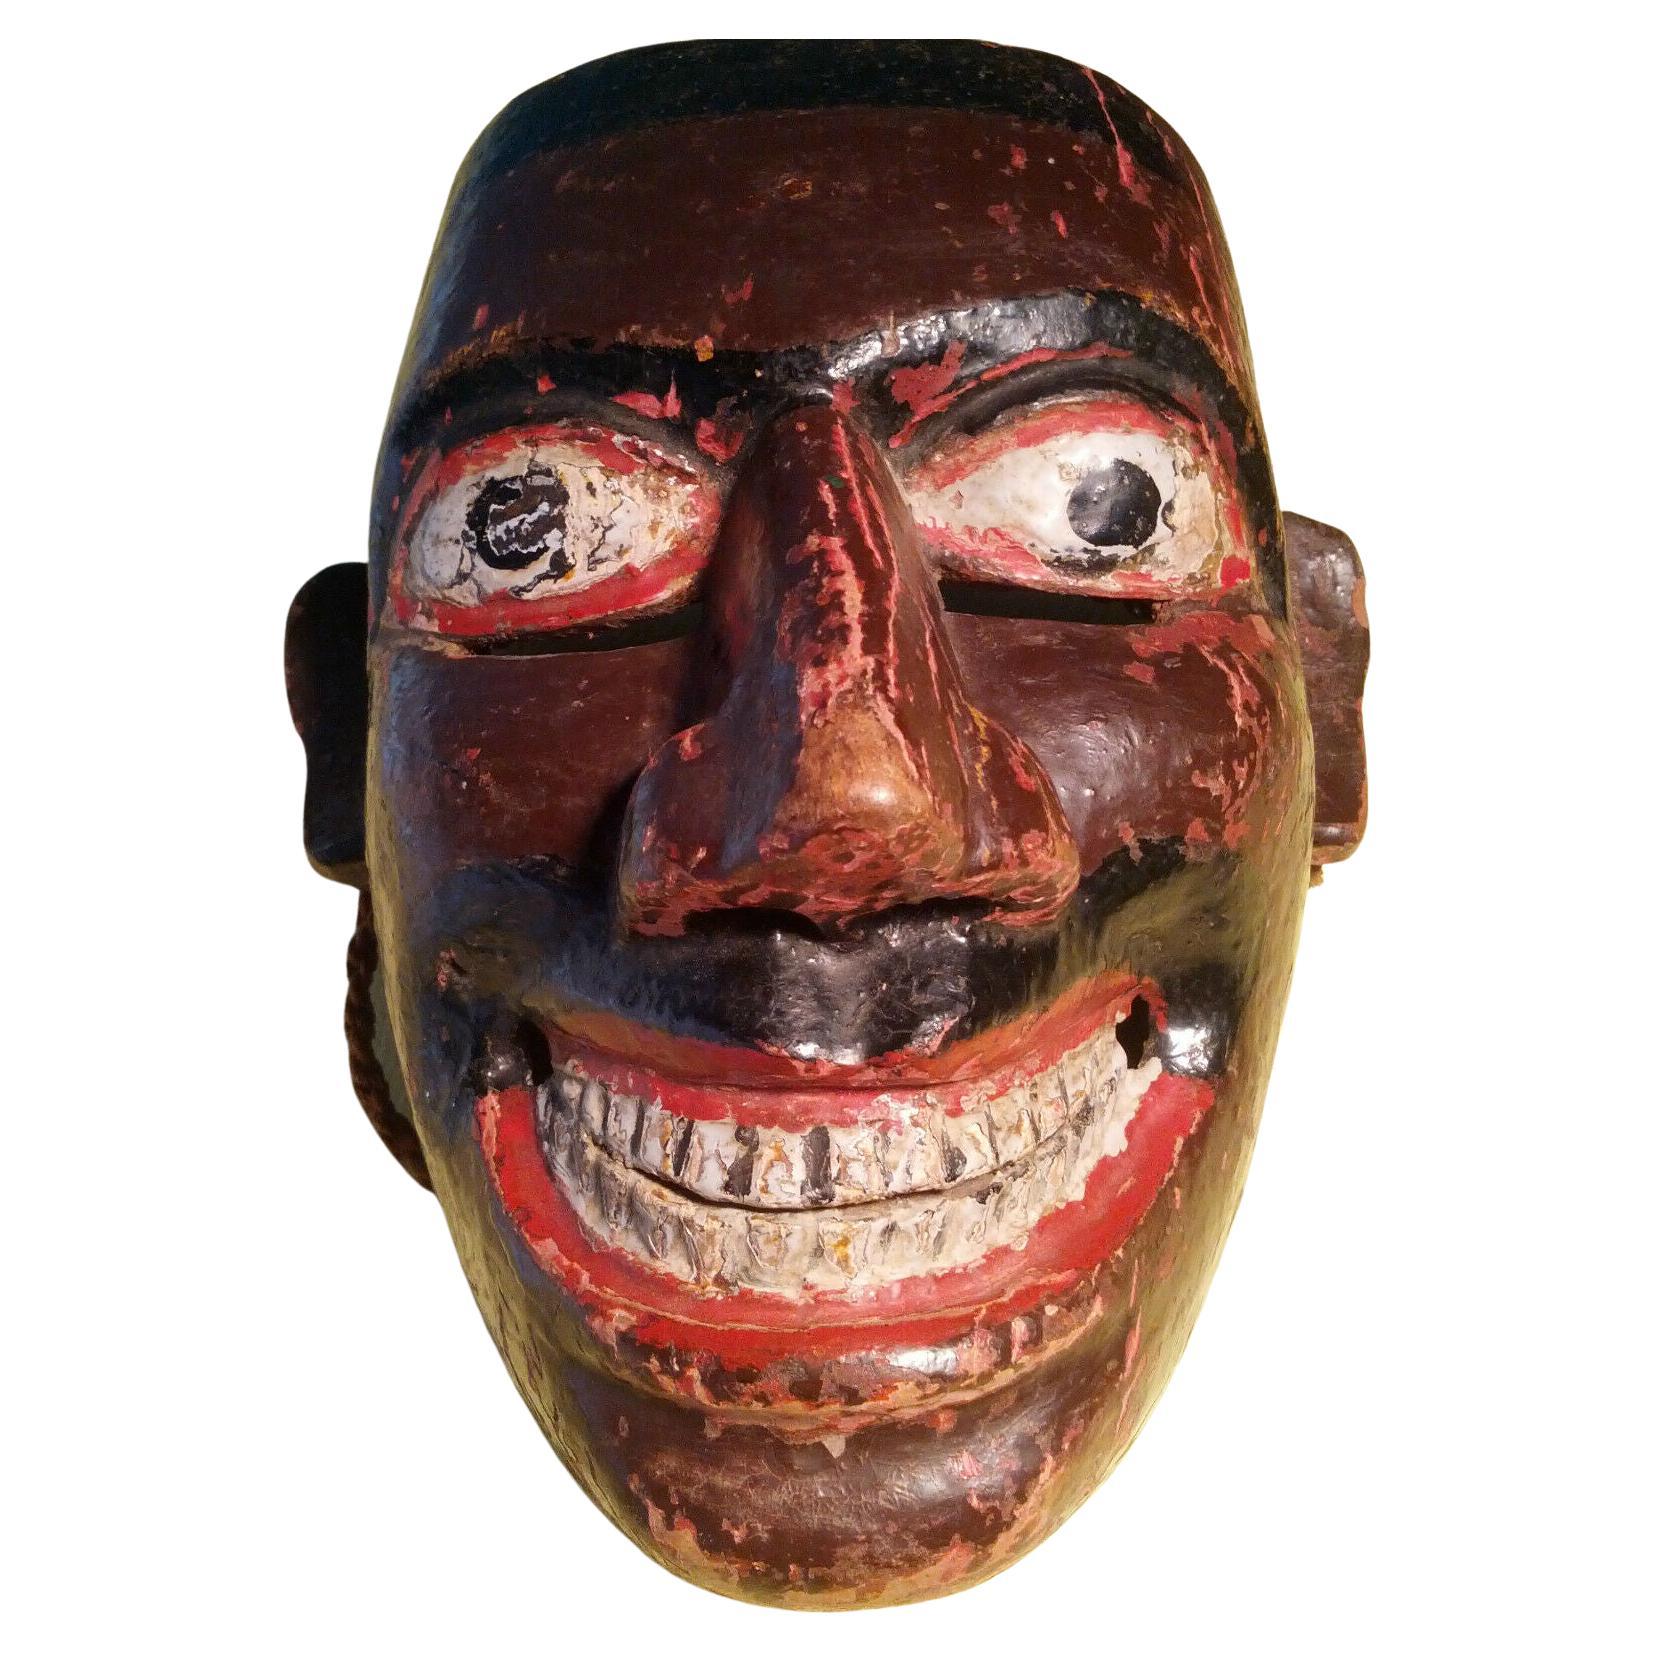 Sri Lankan Traditional Devils Mask Hand Carved Wood Wall Art Decor Home,Office 